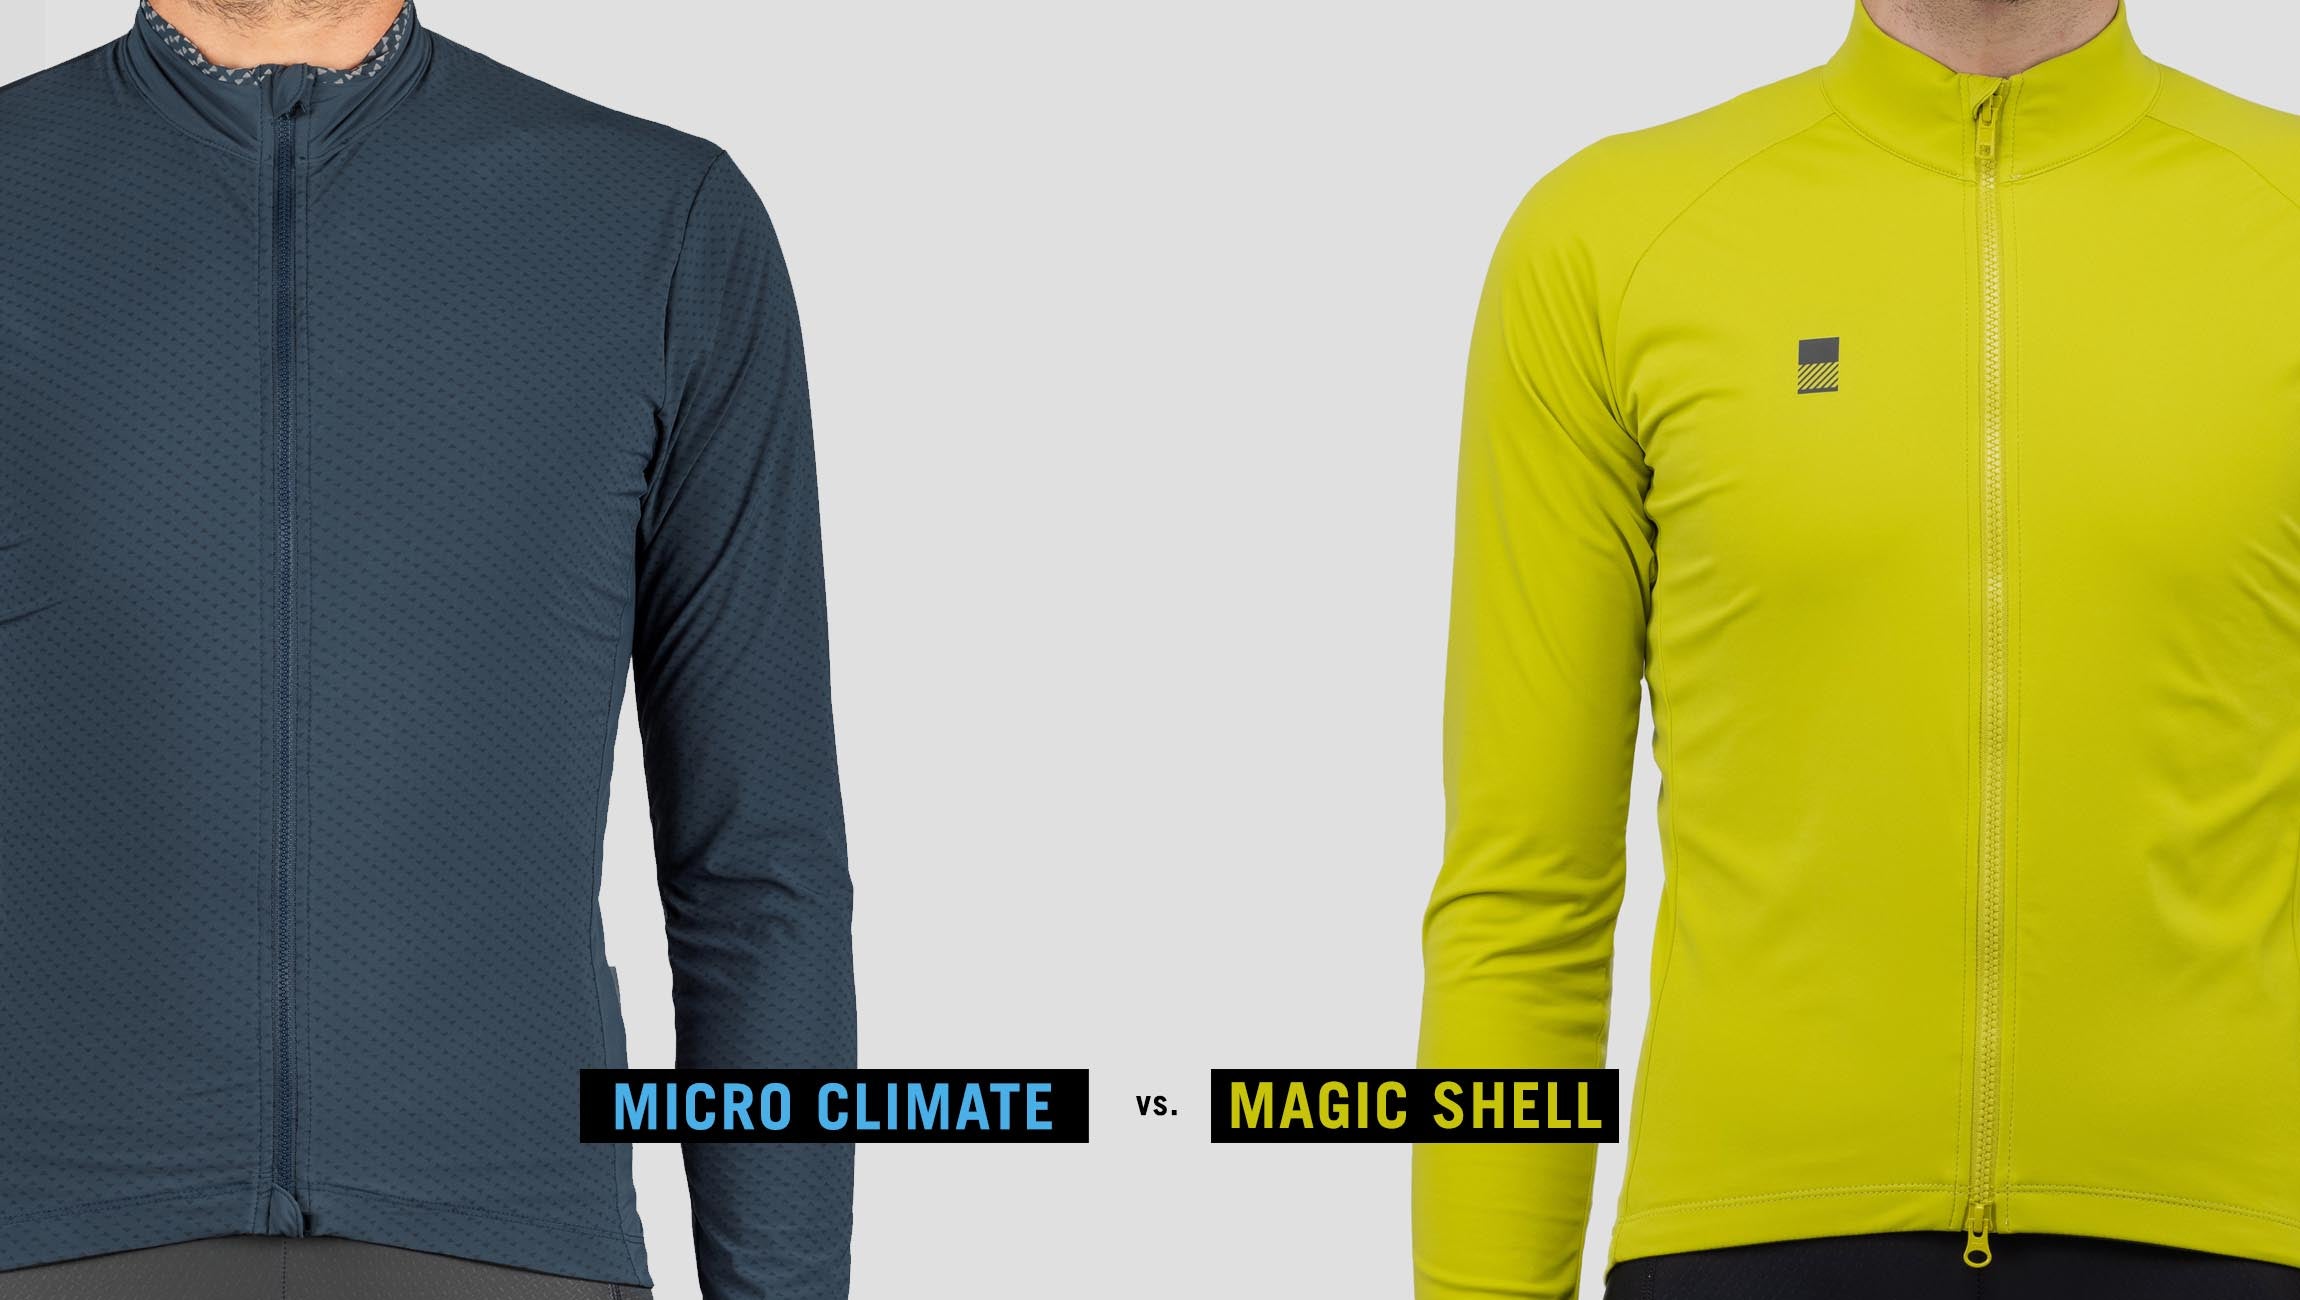 Differences between the Ornot Magic Shell and Micro Climate cycling jackets